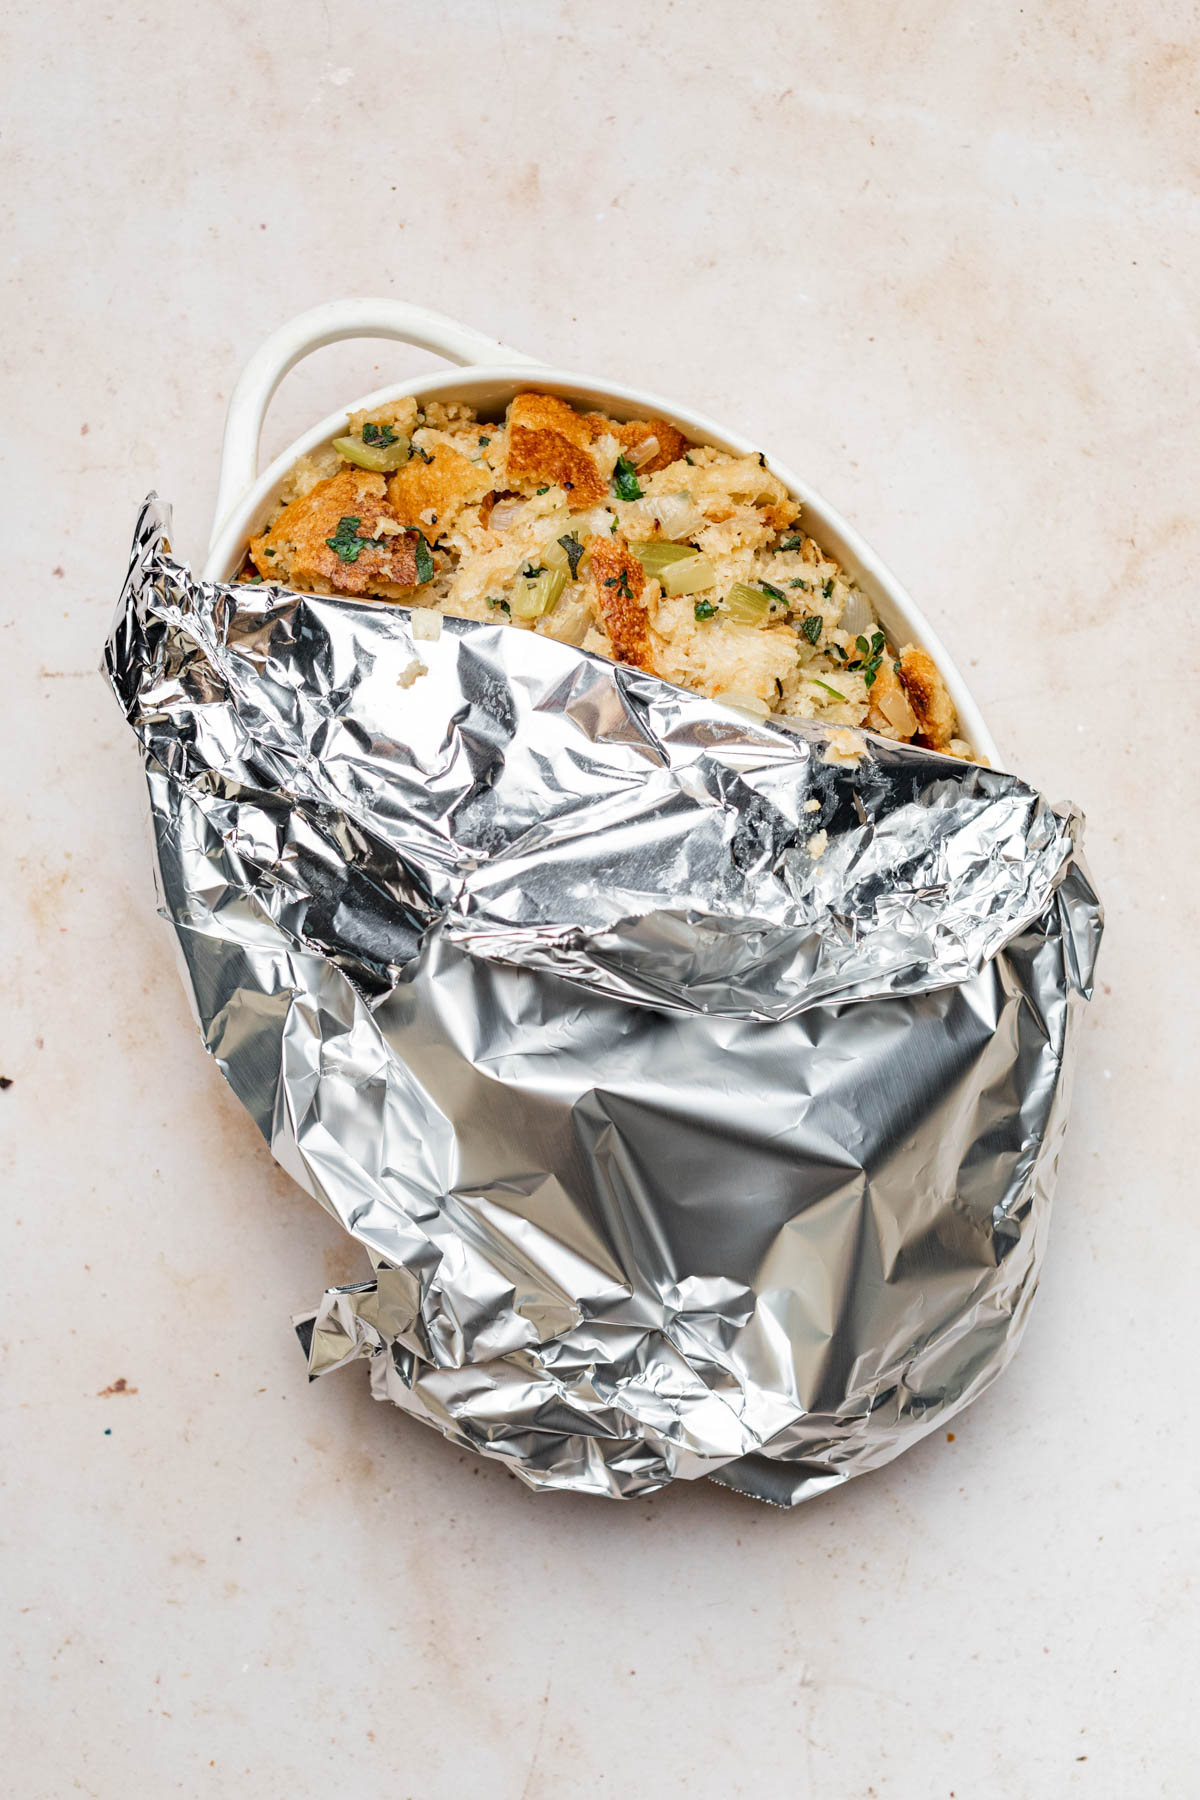 Tin foil being removed from baked stuffing.